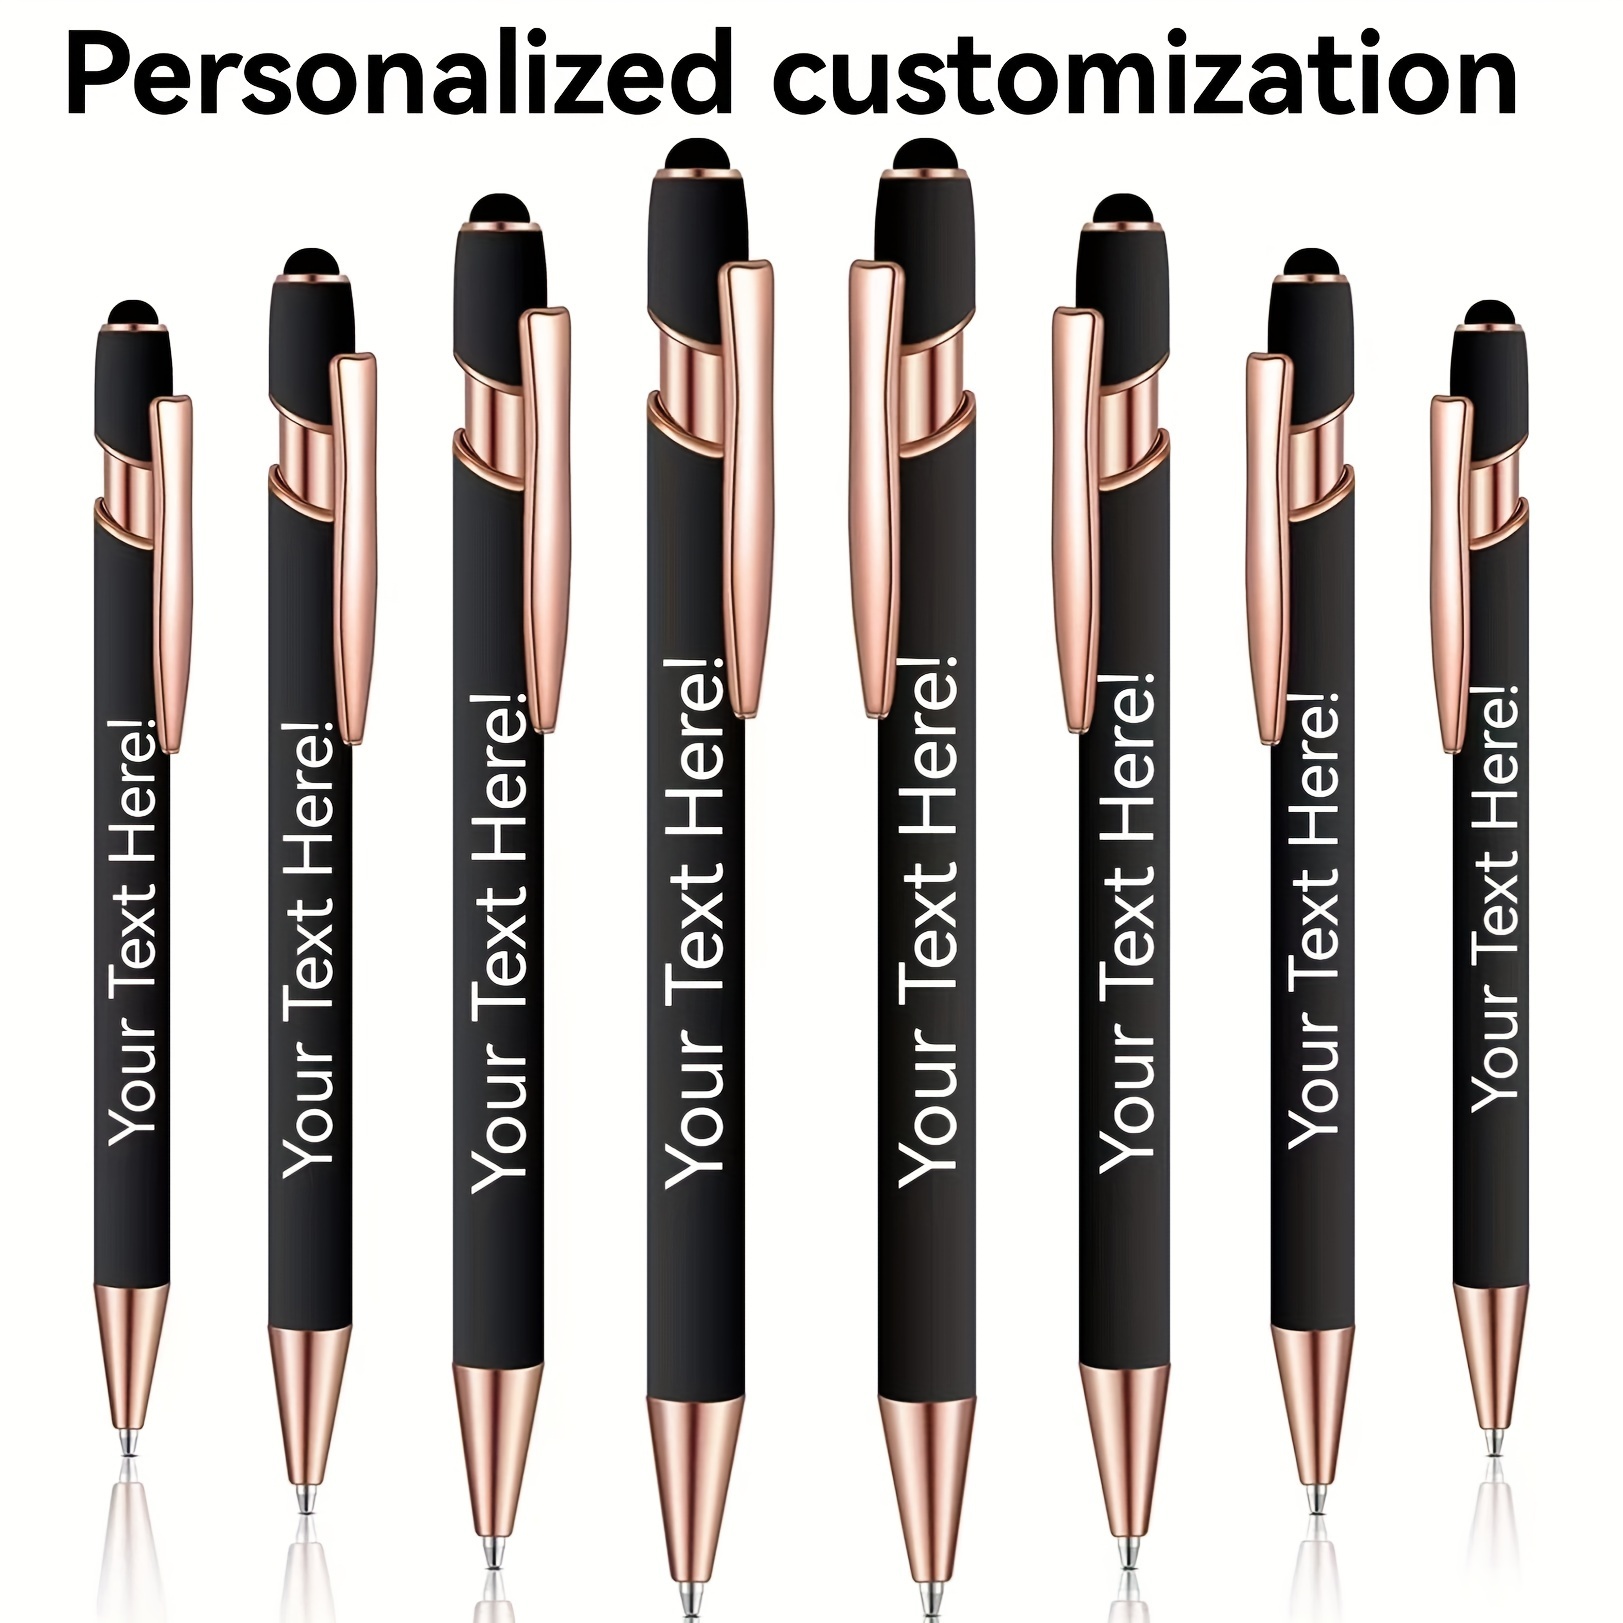 

Customized Pretty Cute 8-pack Ballpoint Pen 2 In 1 Stylus Retractable Ballpoint Pen With Stylus Tip, Metal Stylus Pen For Touch Screen, 1.0mm Black Ink (black)